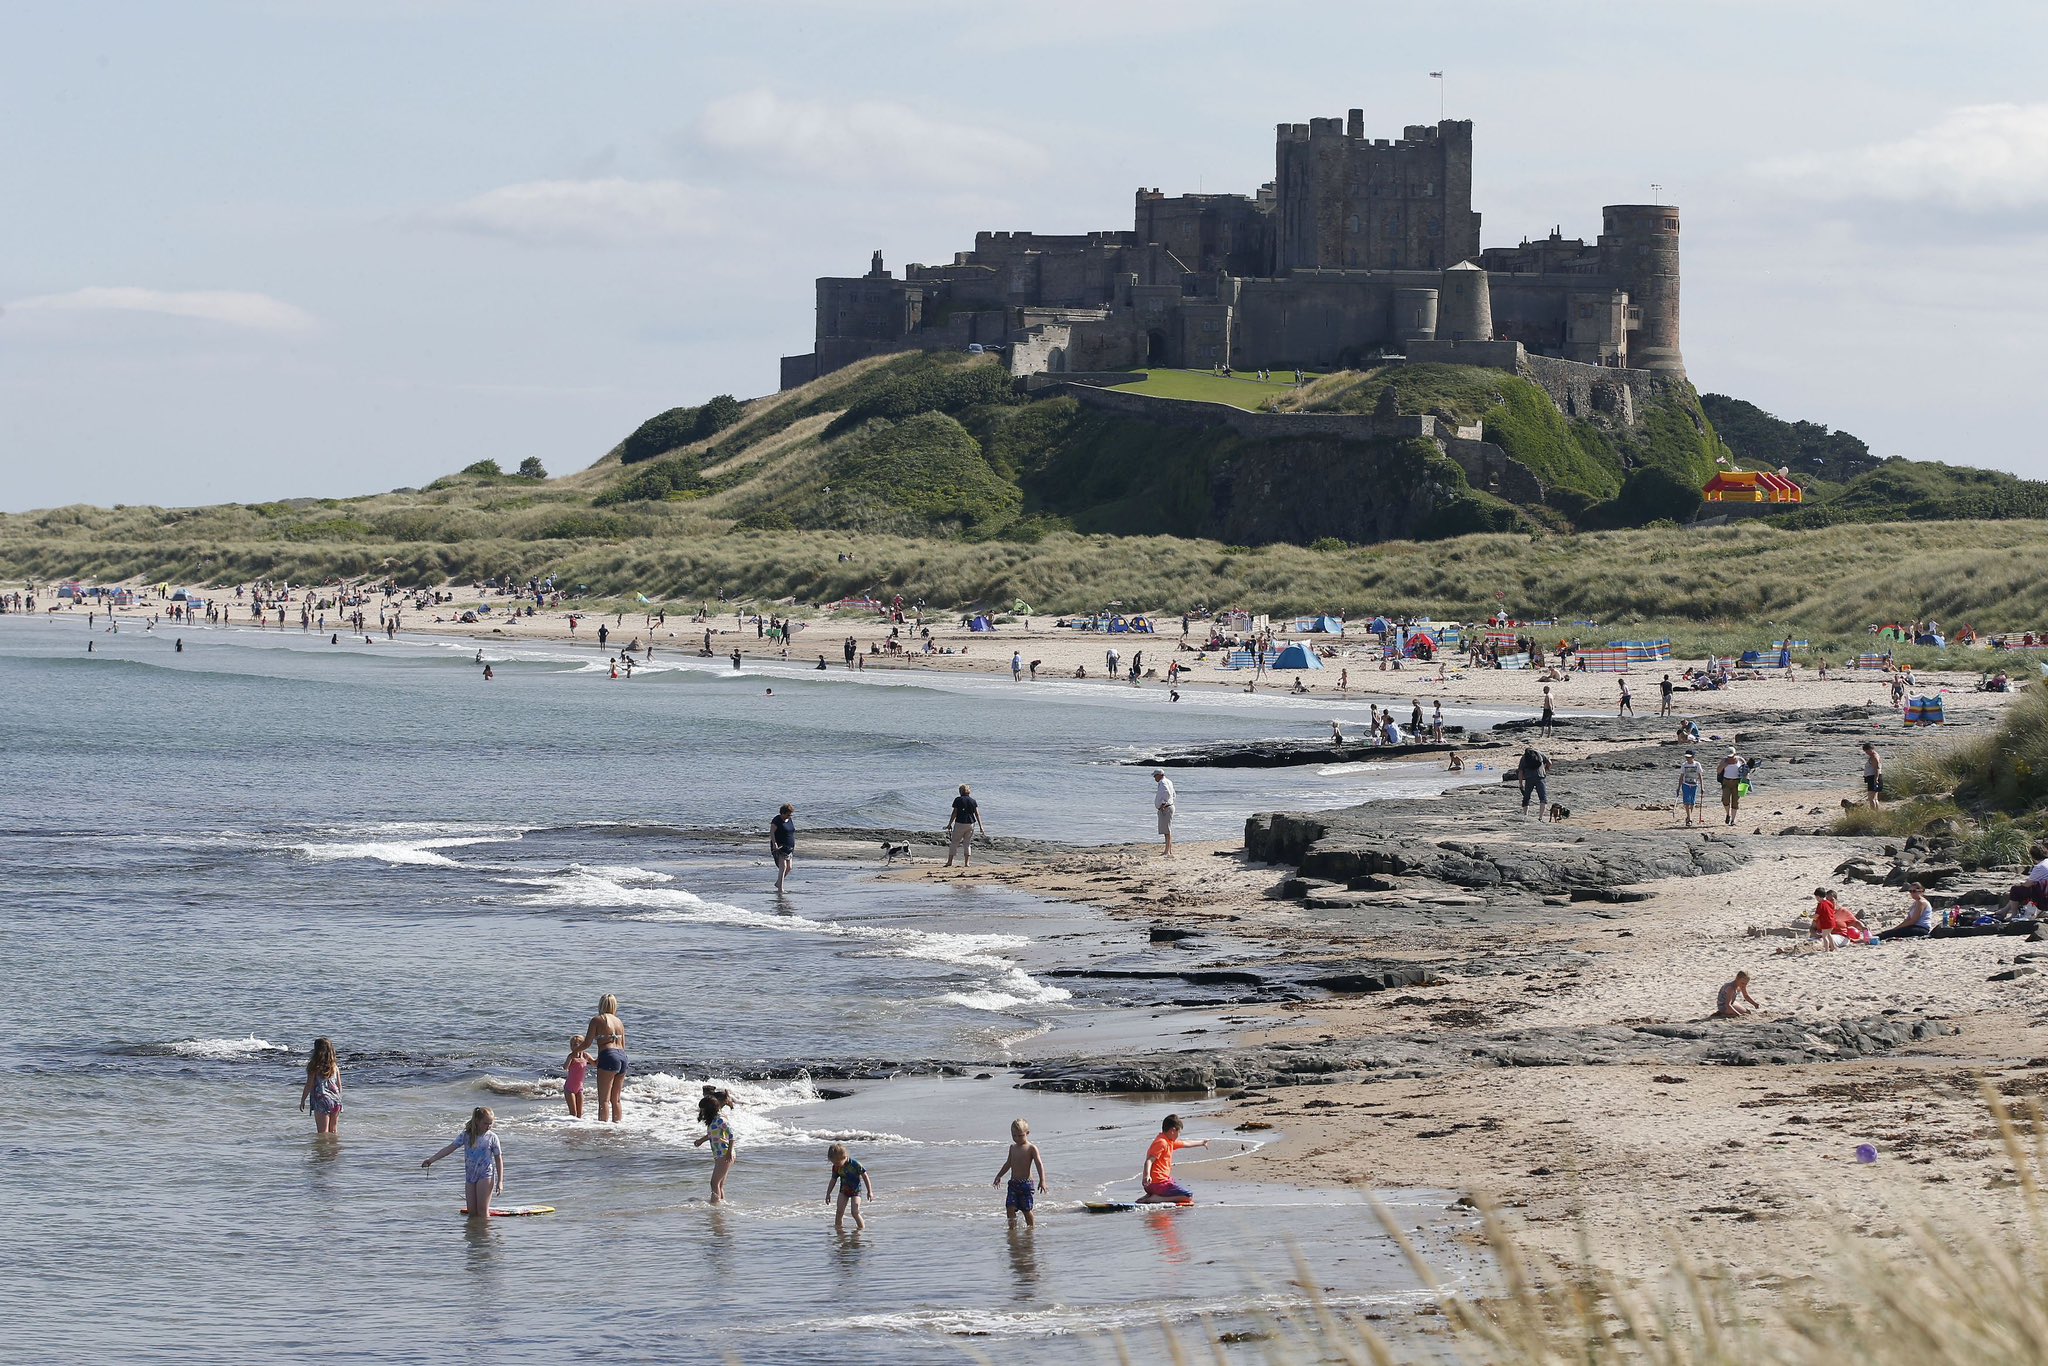 Destiny is all at Bamburgh Castle this summer